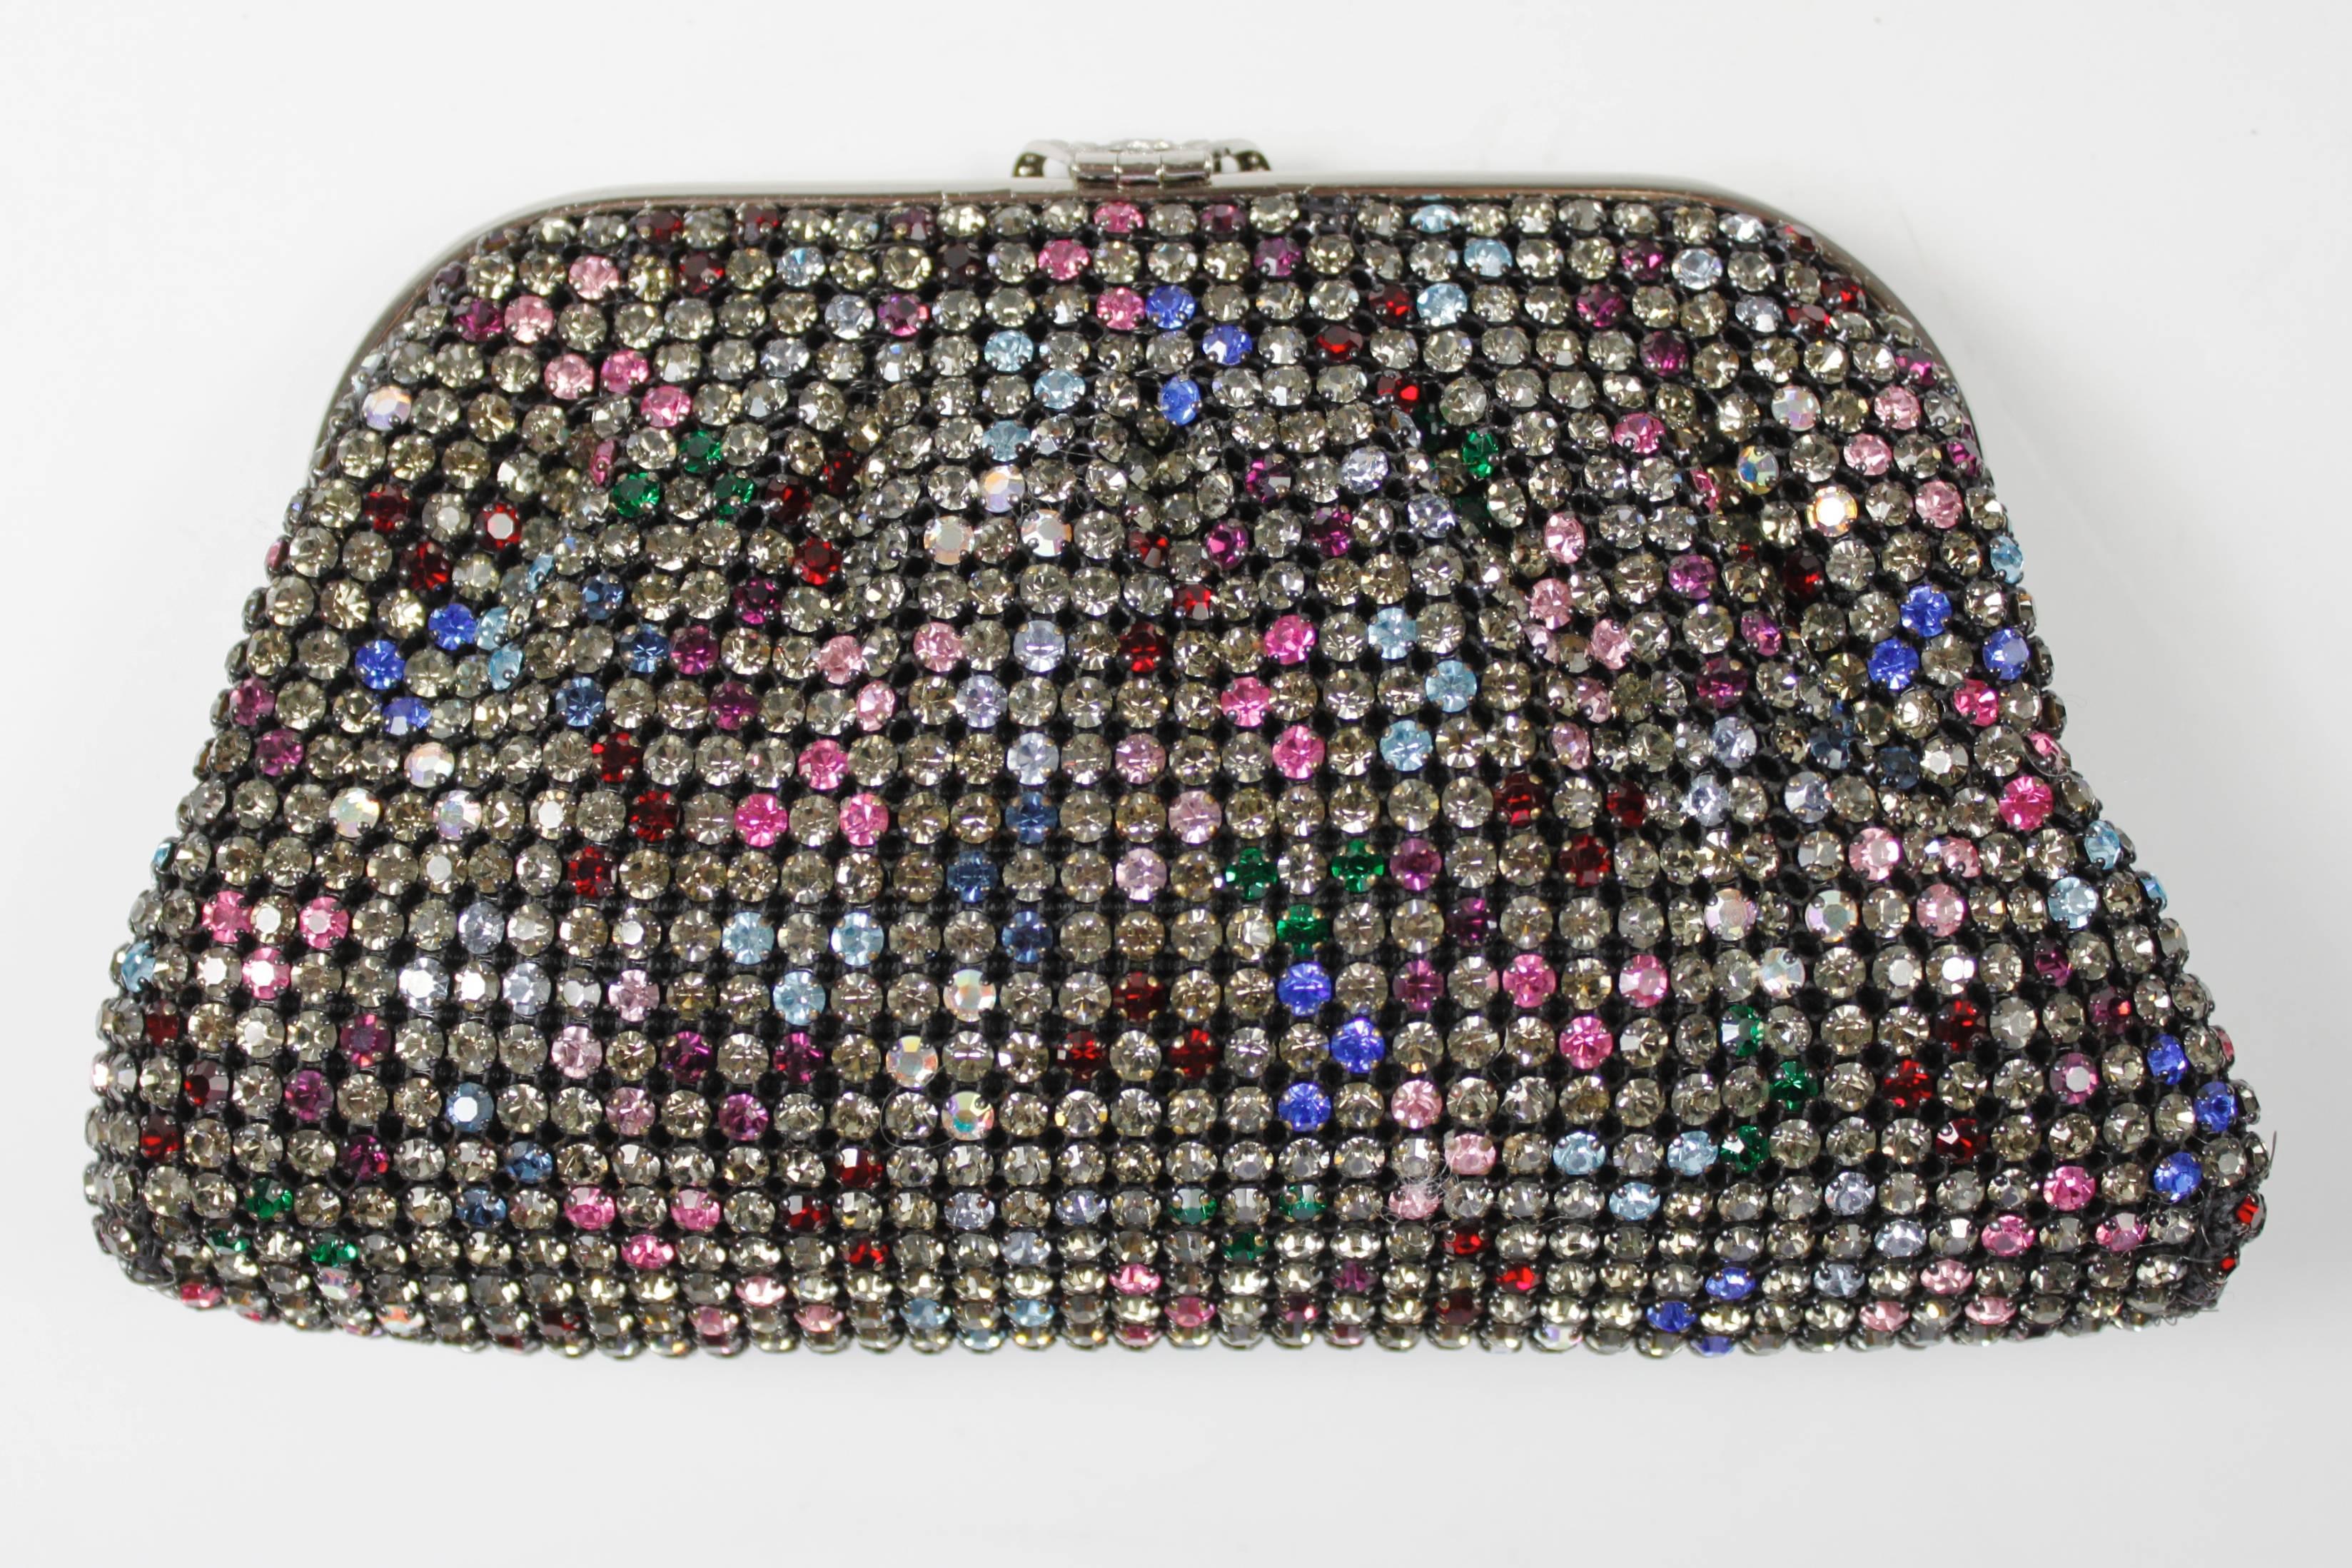 This is the perfect year-round evening clutch: covered in rainbow rhinestones--red, pink, two shades of blue, smokey grey, green, and iridescent clear--it pairs beautifully with most ensembles! The hardware is silver and features a deco-style